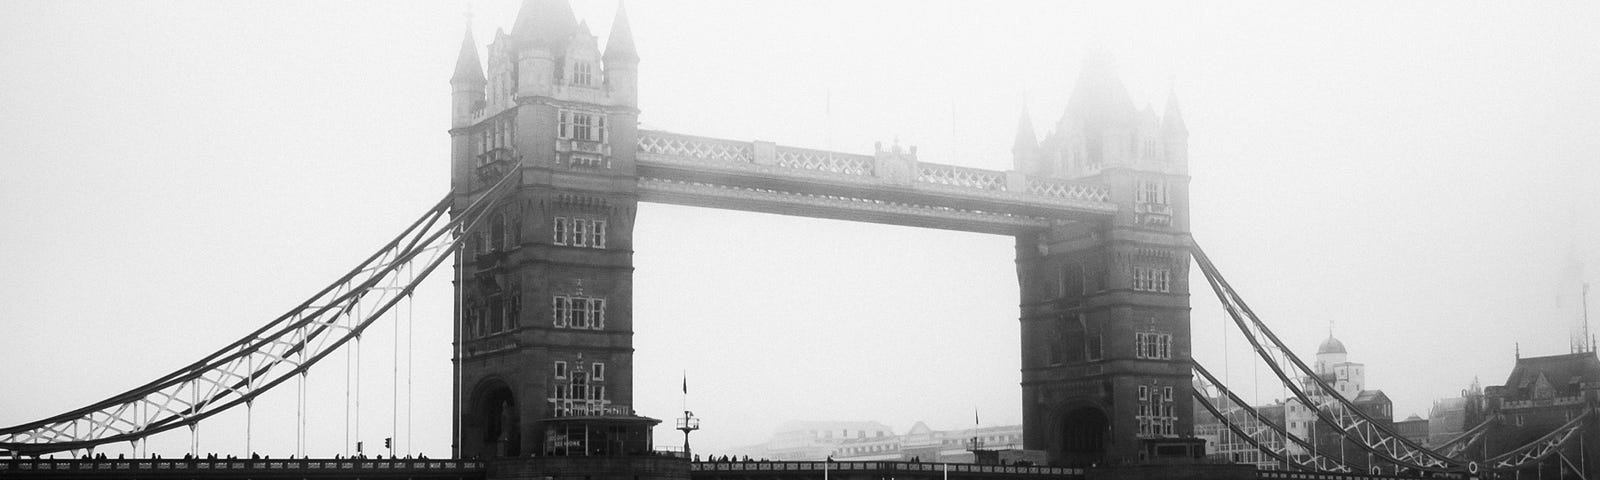 Eerie black and white picture of London bridge taken by the riverside on a foggy day.